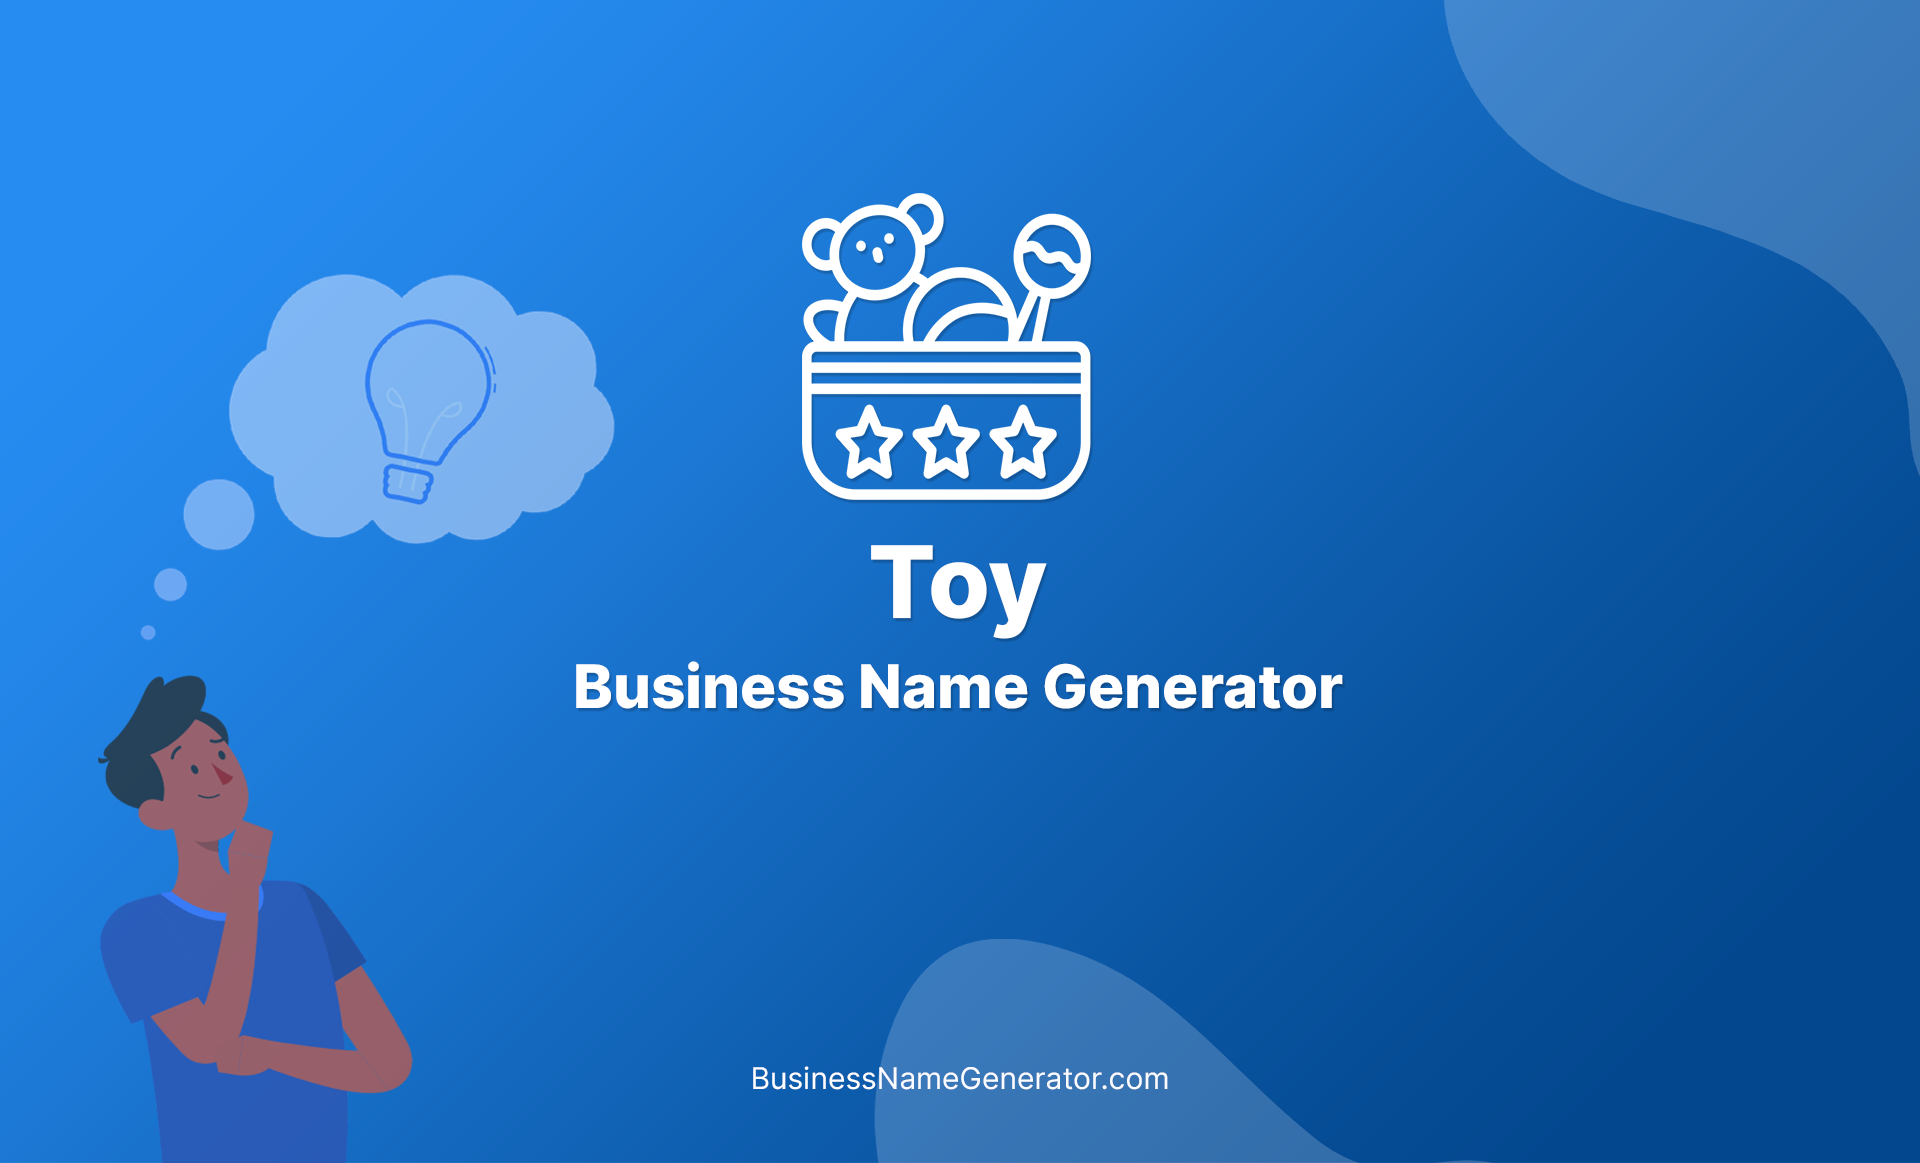 Toy Business Name Generator